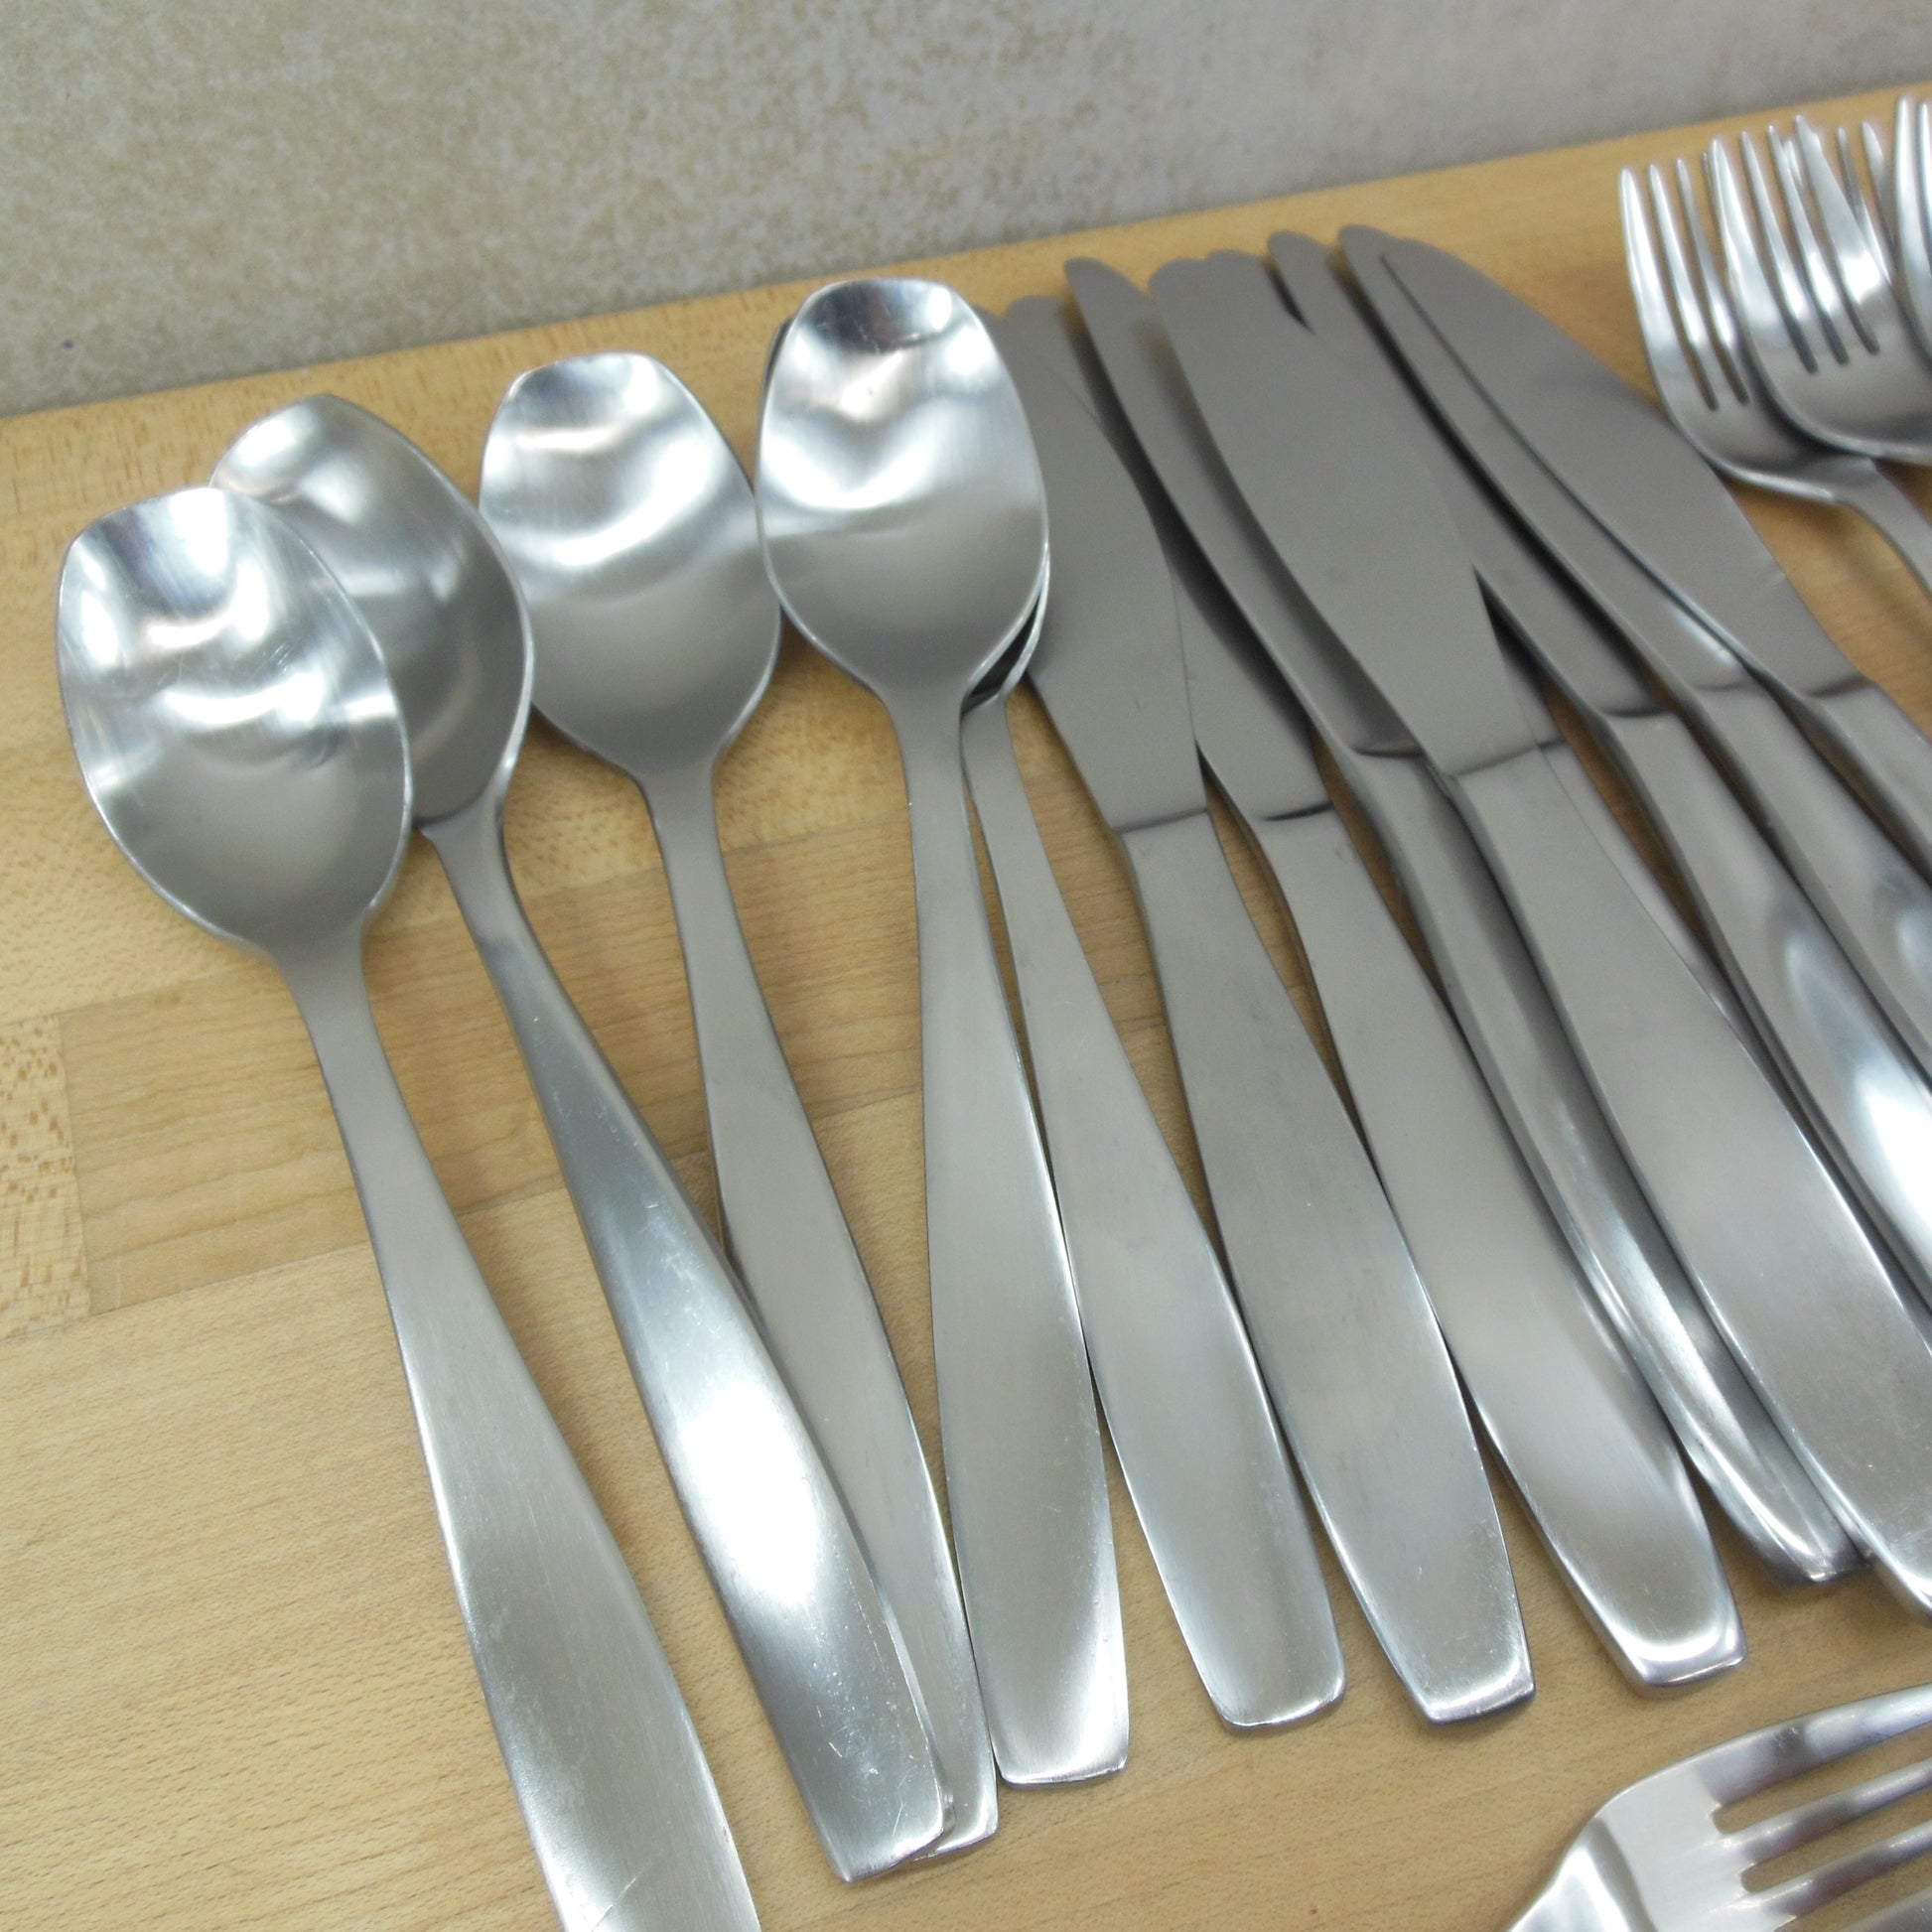 Gourmet Settings Non-Stop Stainless Flatware Partial Set 29 Pieces spoon knife